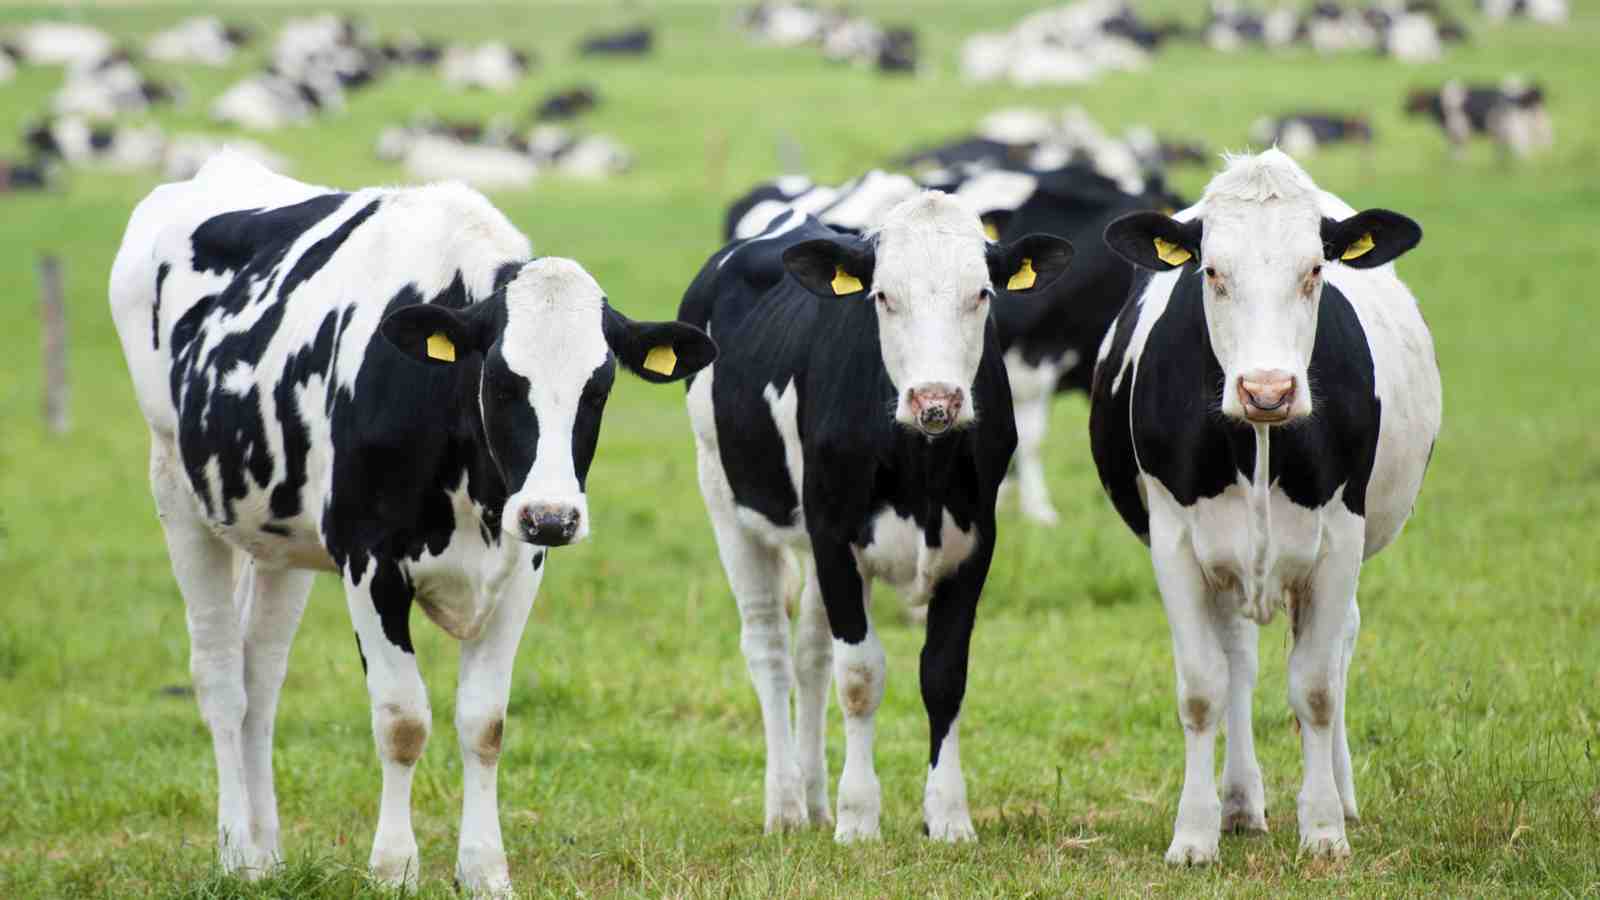 New Zealand dairy cows